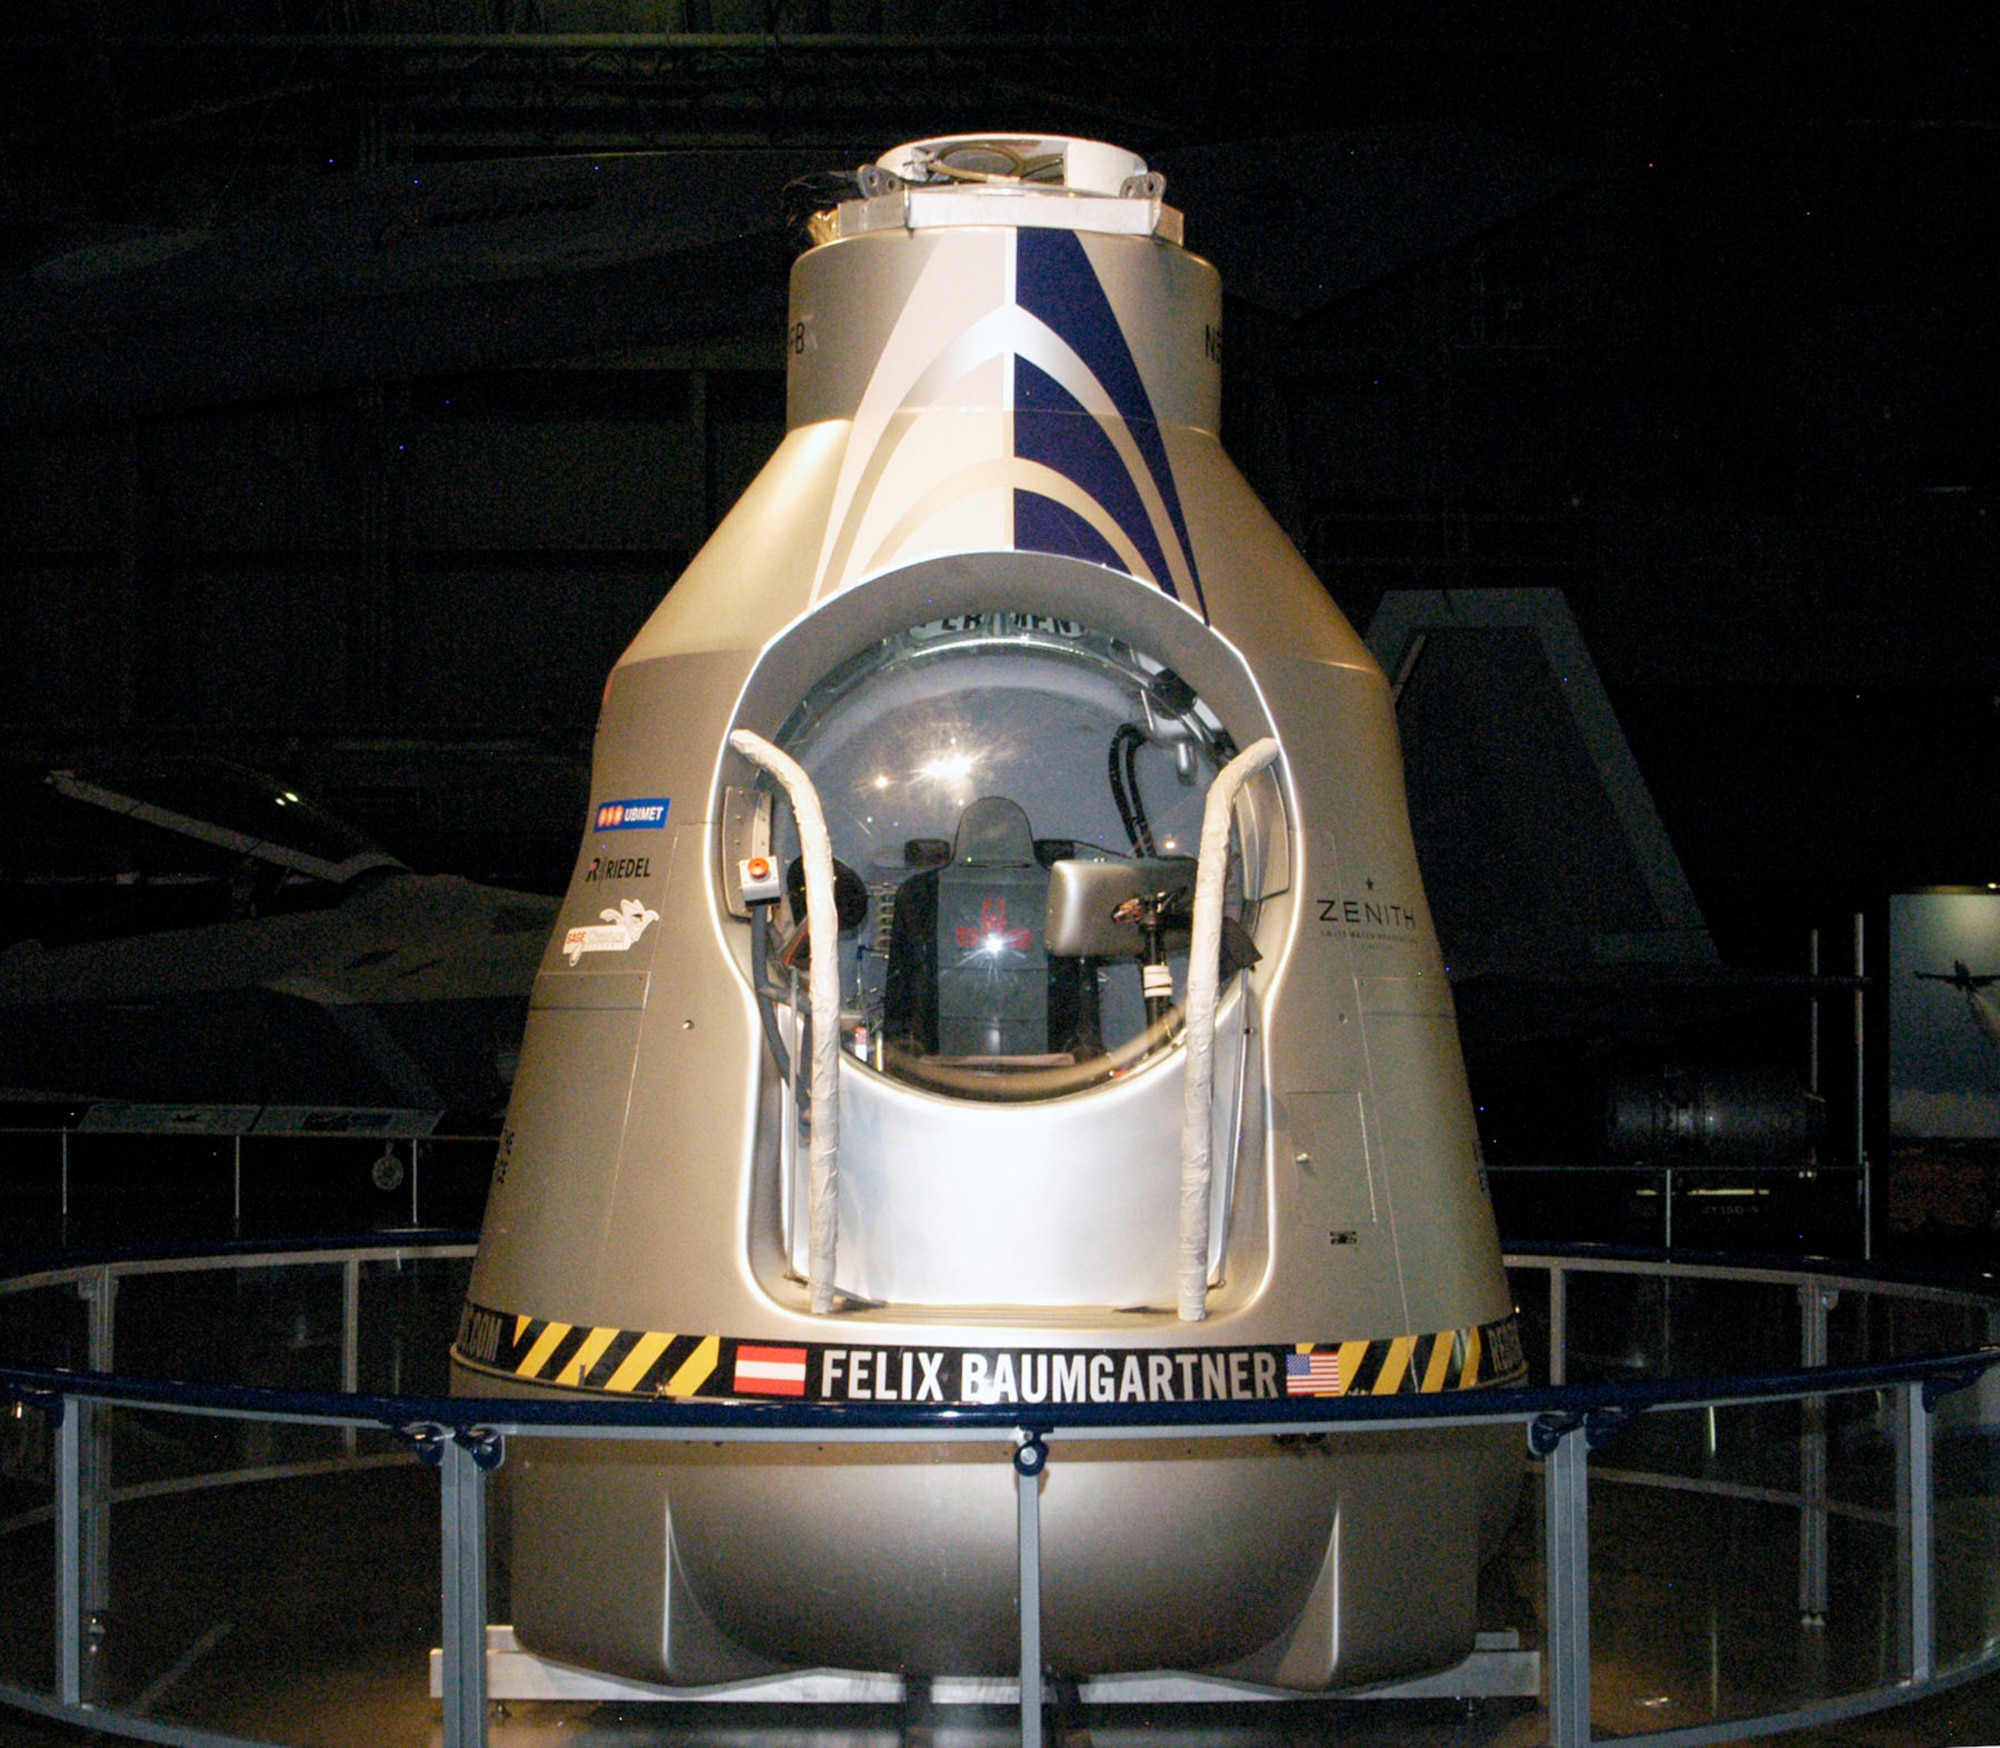 The Red Bull Stratos exhibit will be on display at the National Museum of the U.S. Air Force from Jan. 24-March 16, 2014. (U.S. Air Force photo)